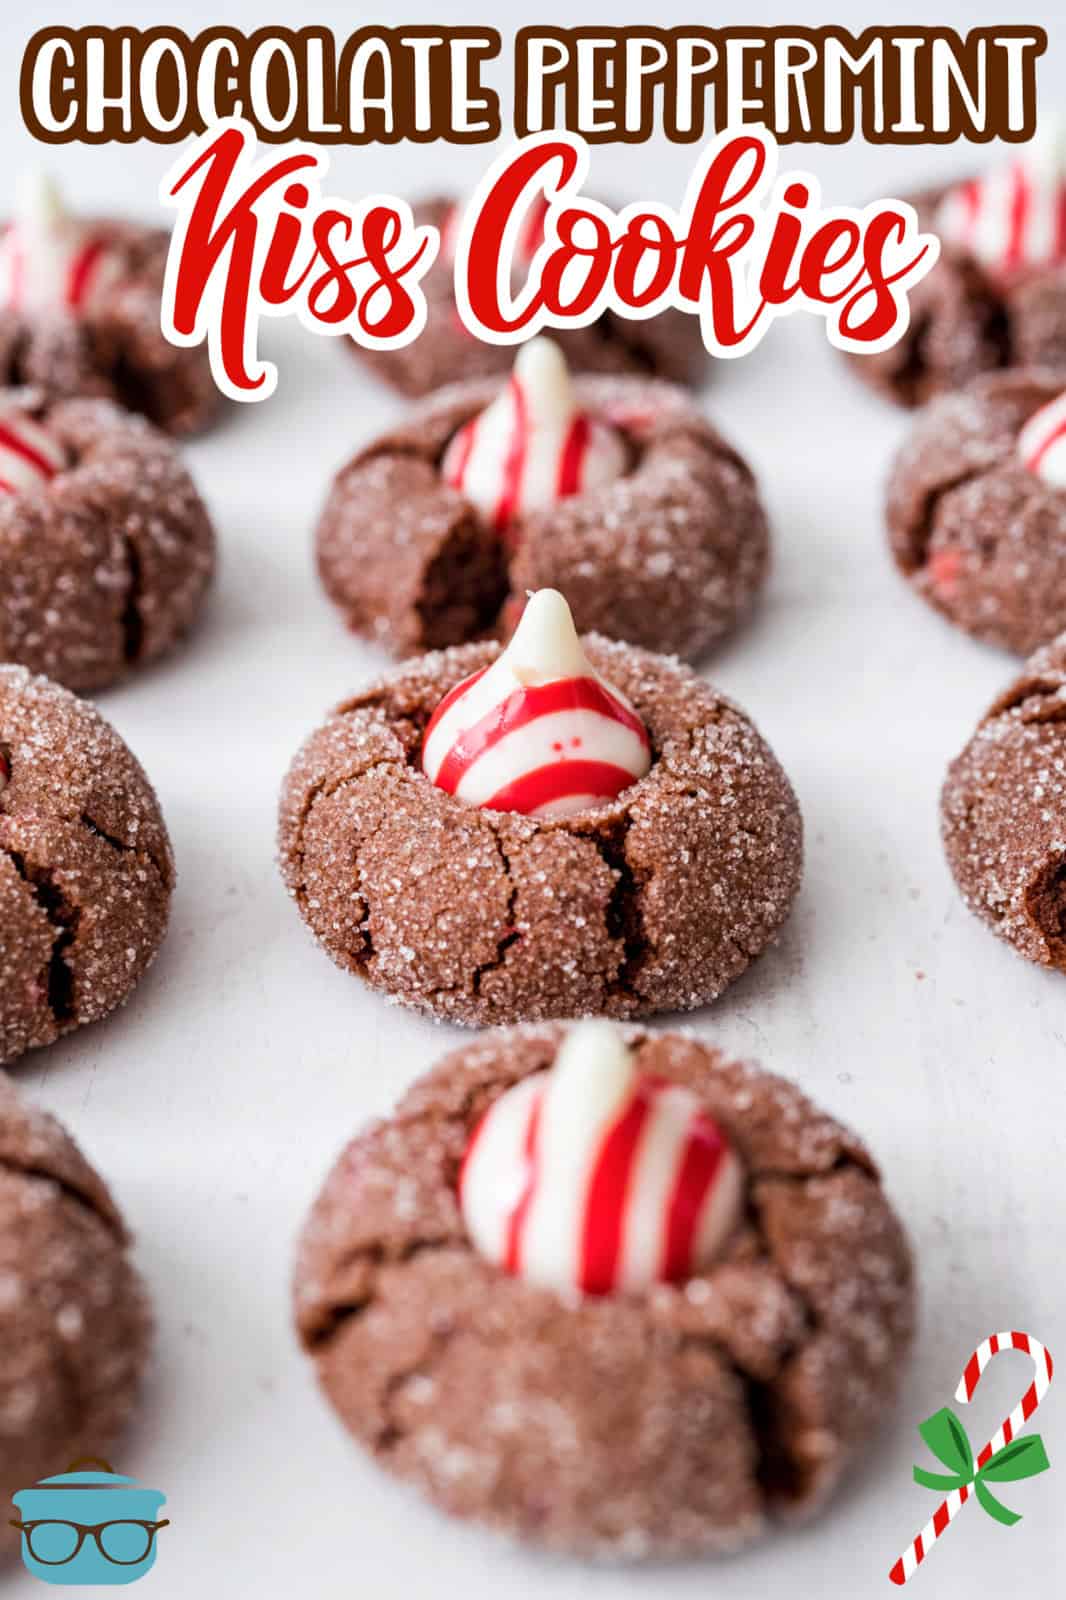 Lined up Chocolate Peppermint Kiss Cookies on white board, Pinterest image.